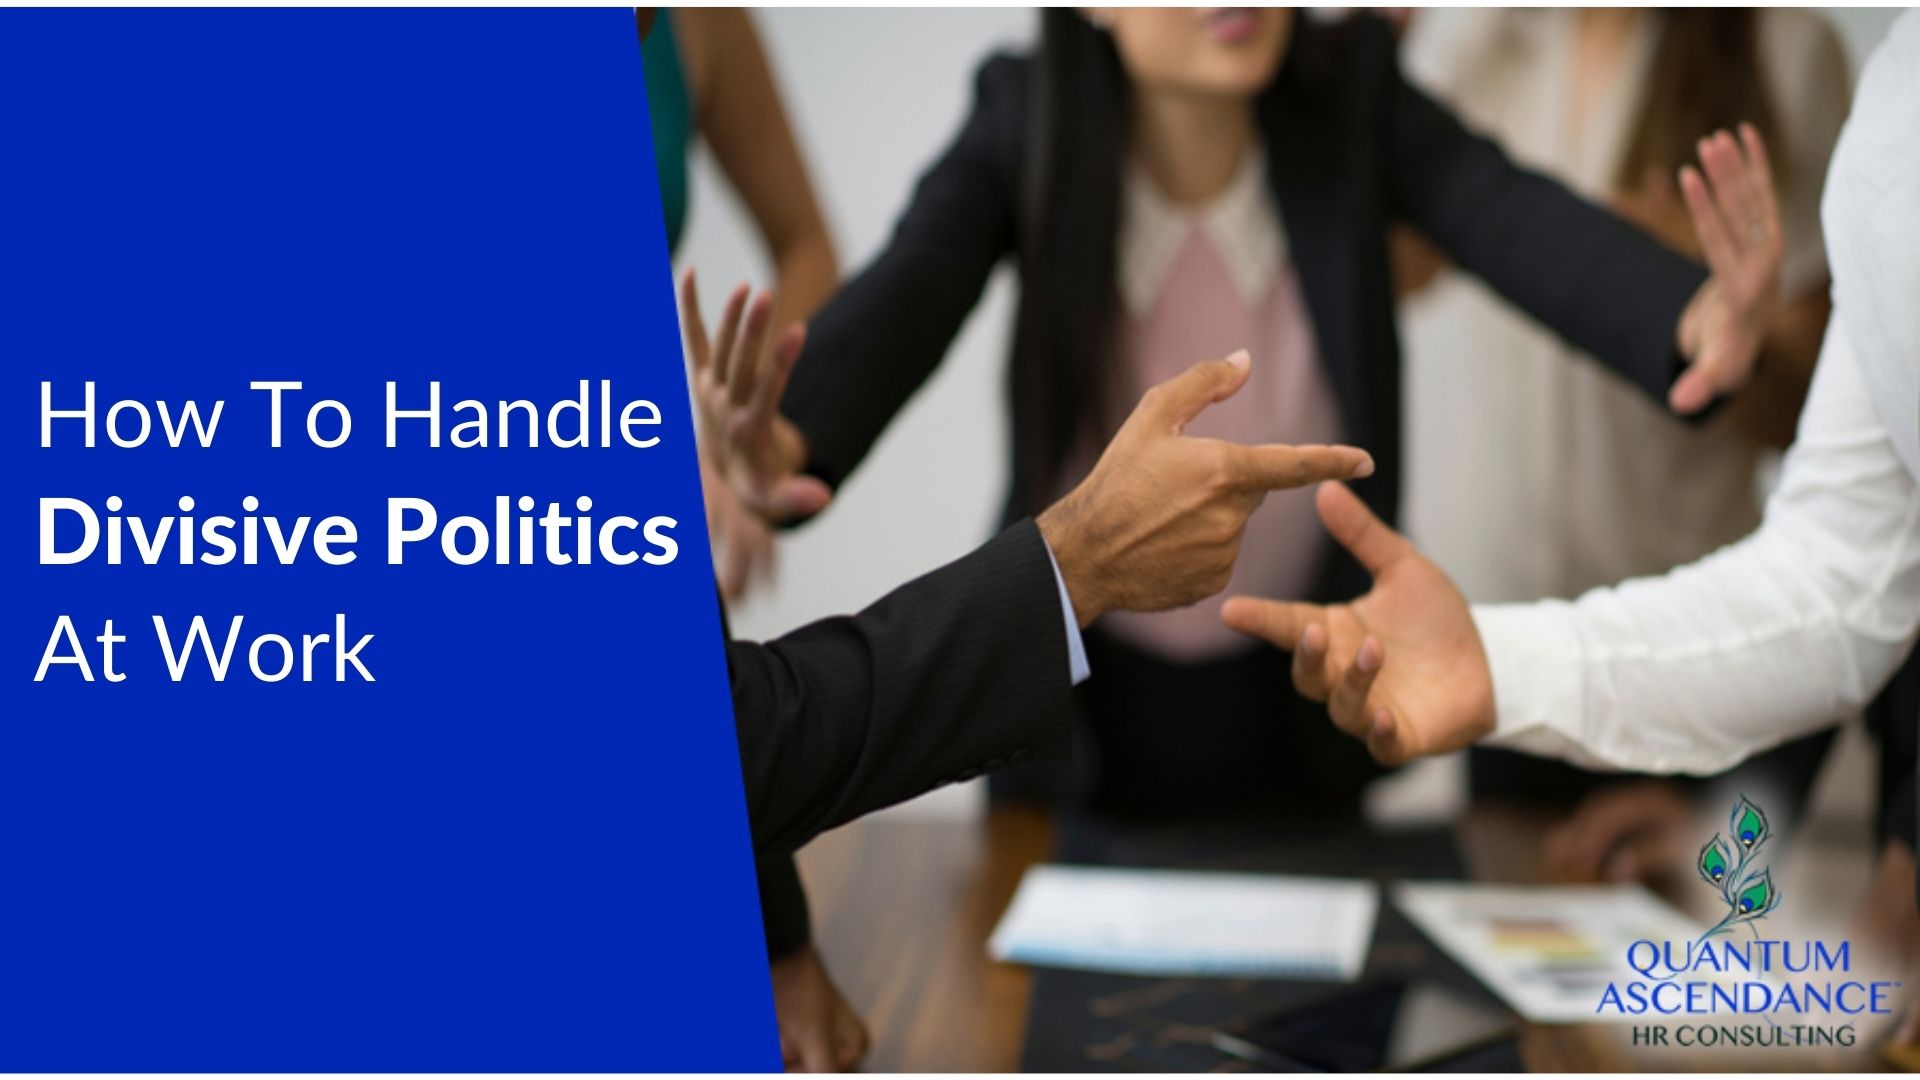 How To Handle Divisive Politics At Work